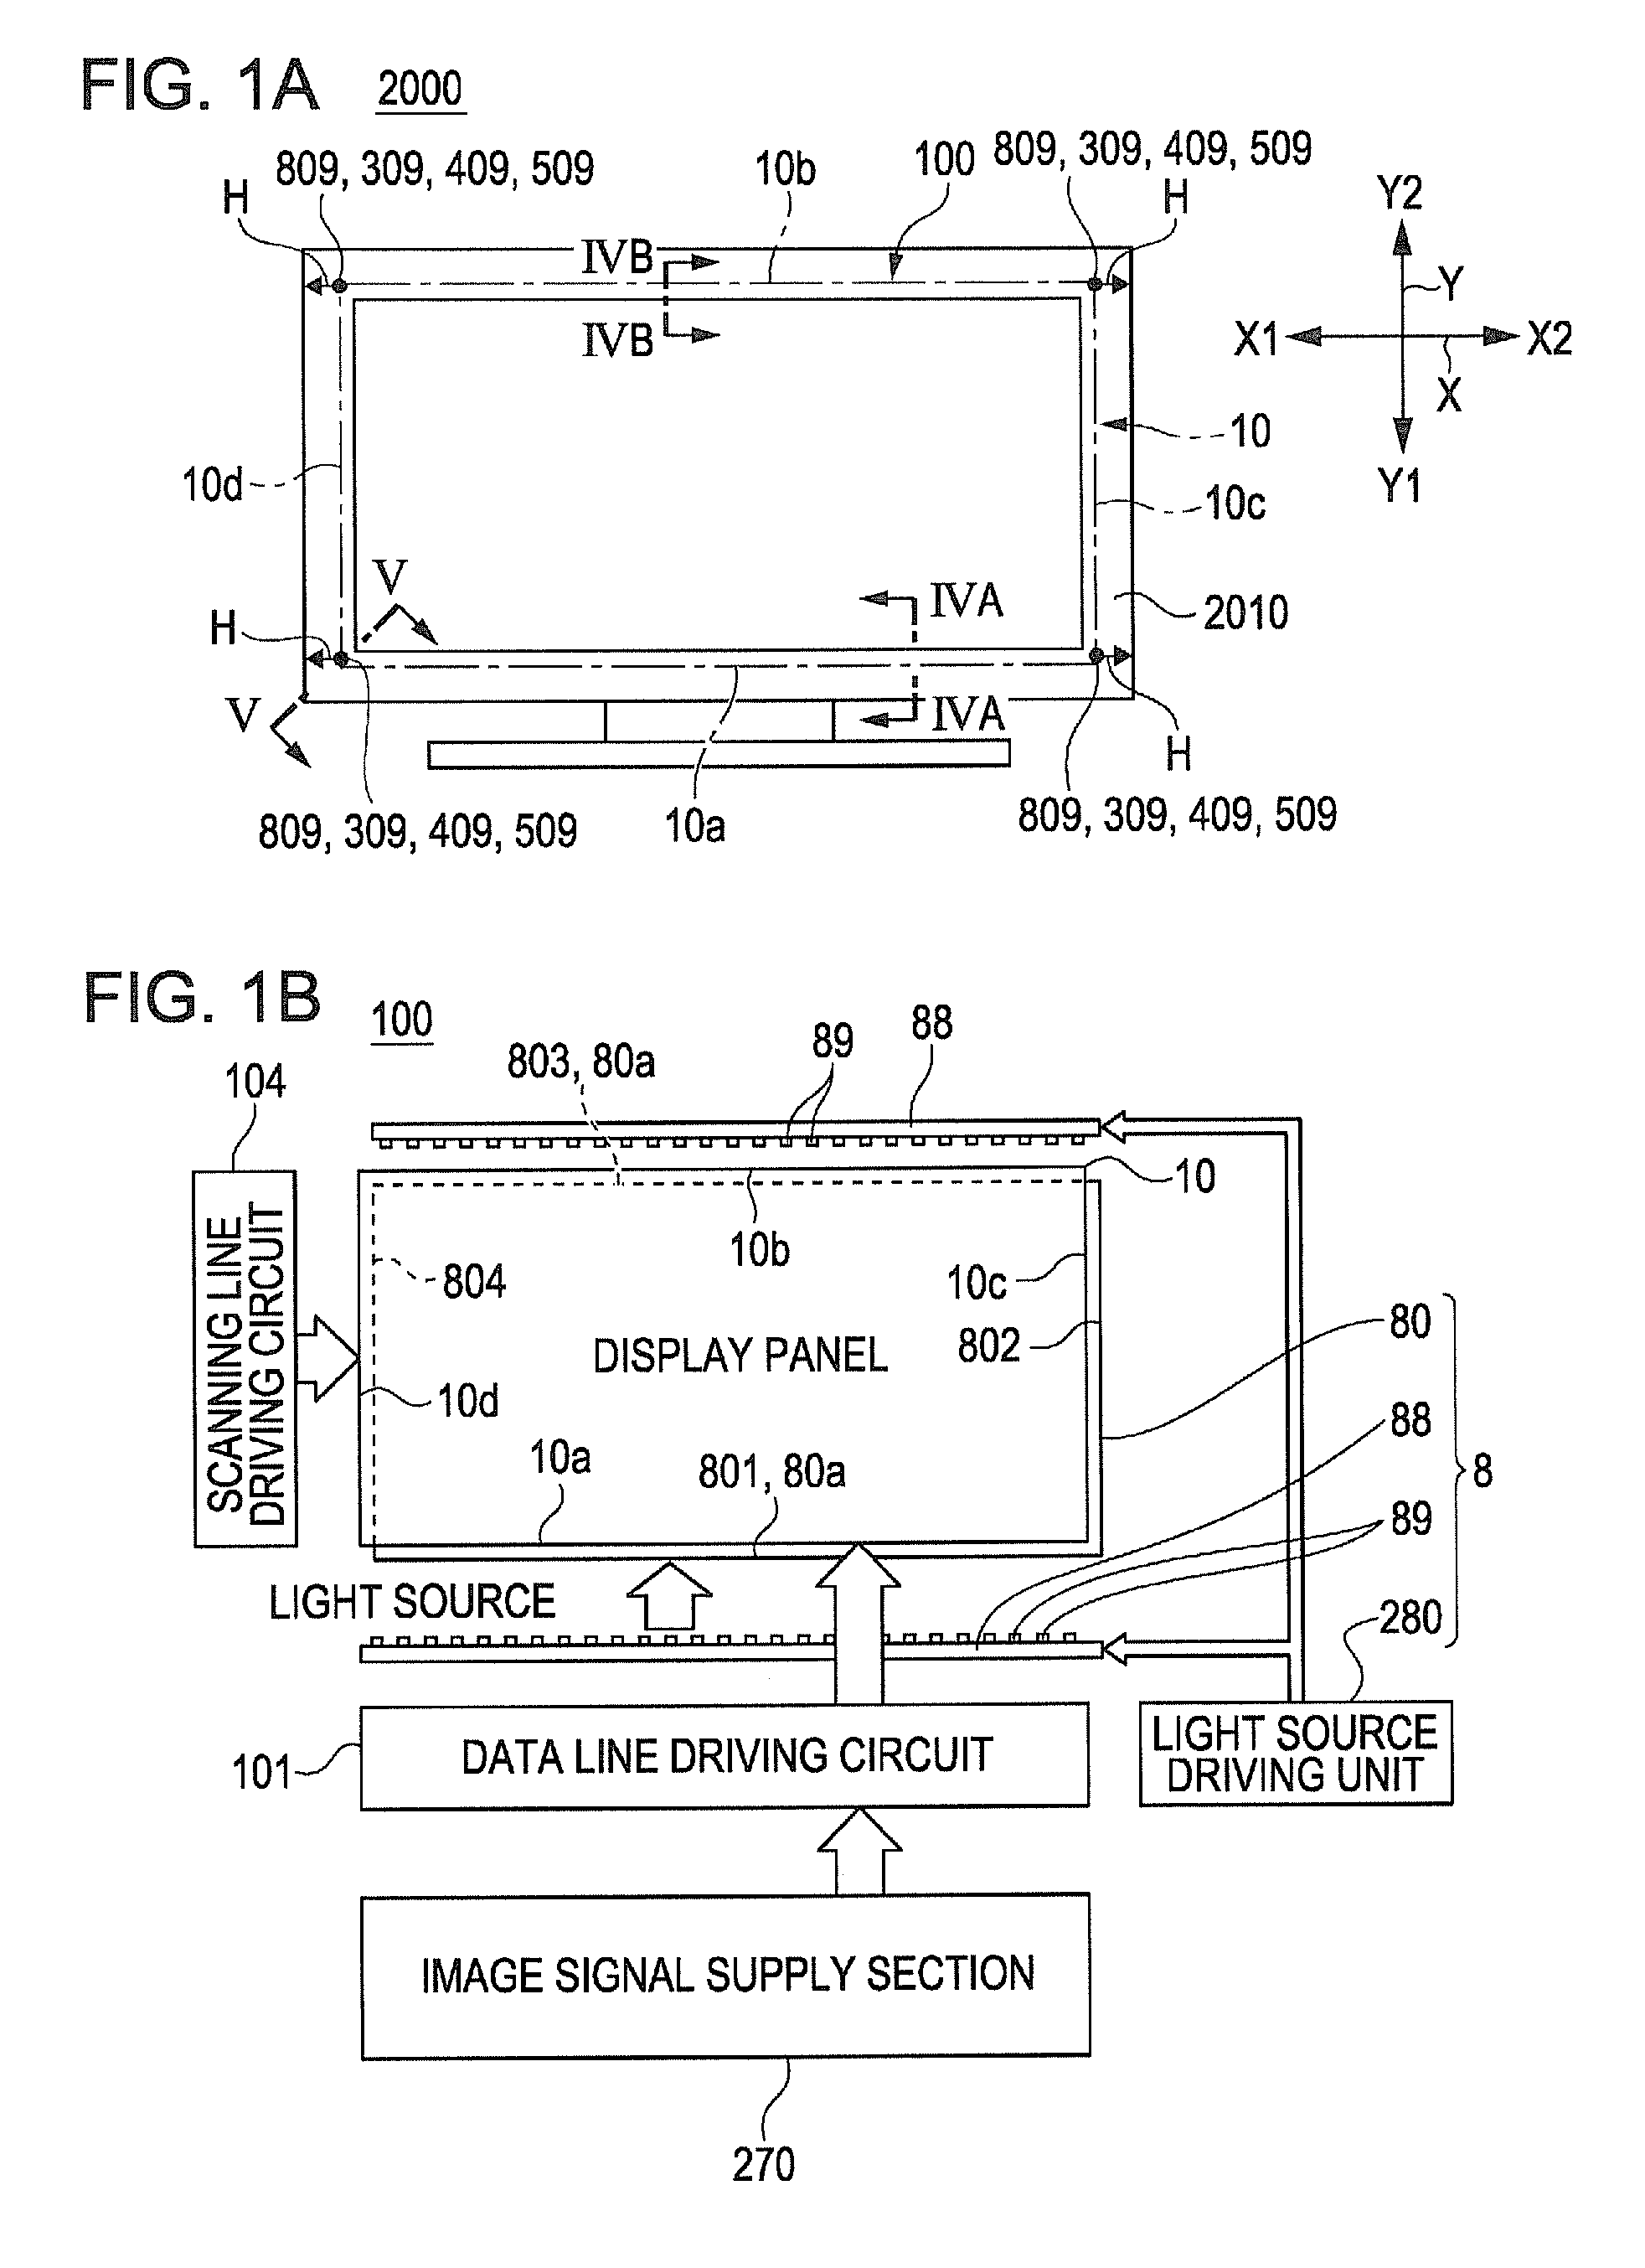 Display device, electronic apparatus and illumination device